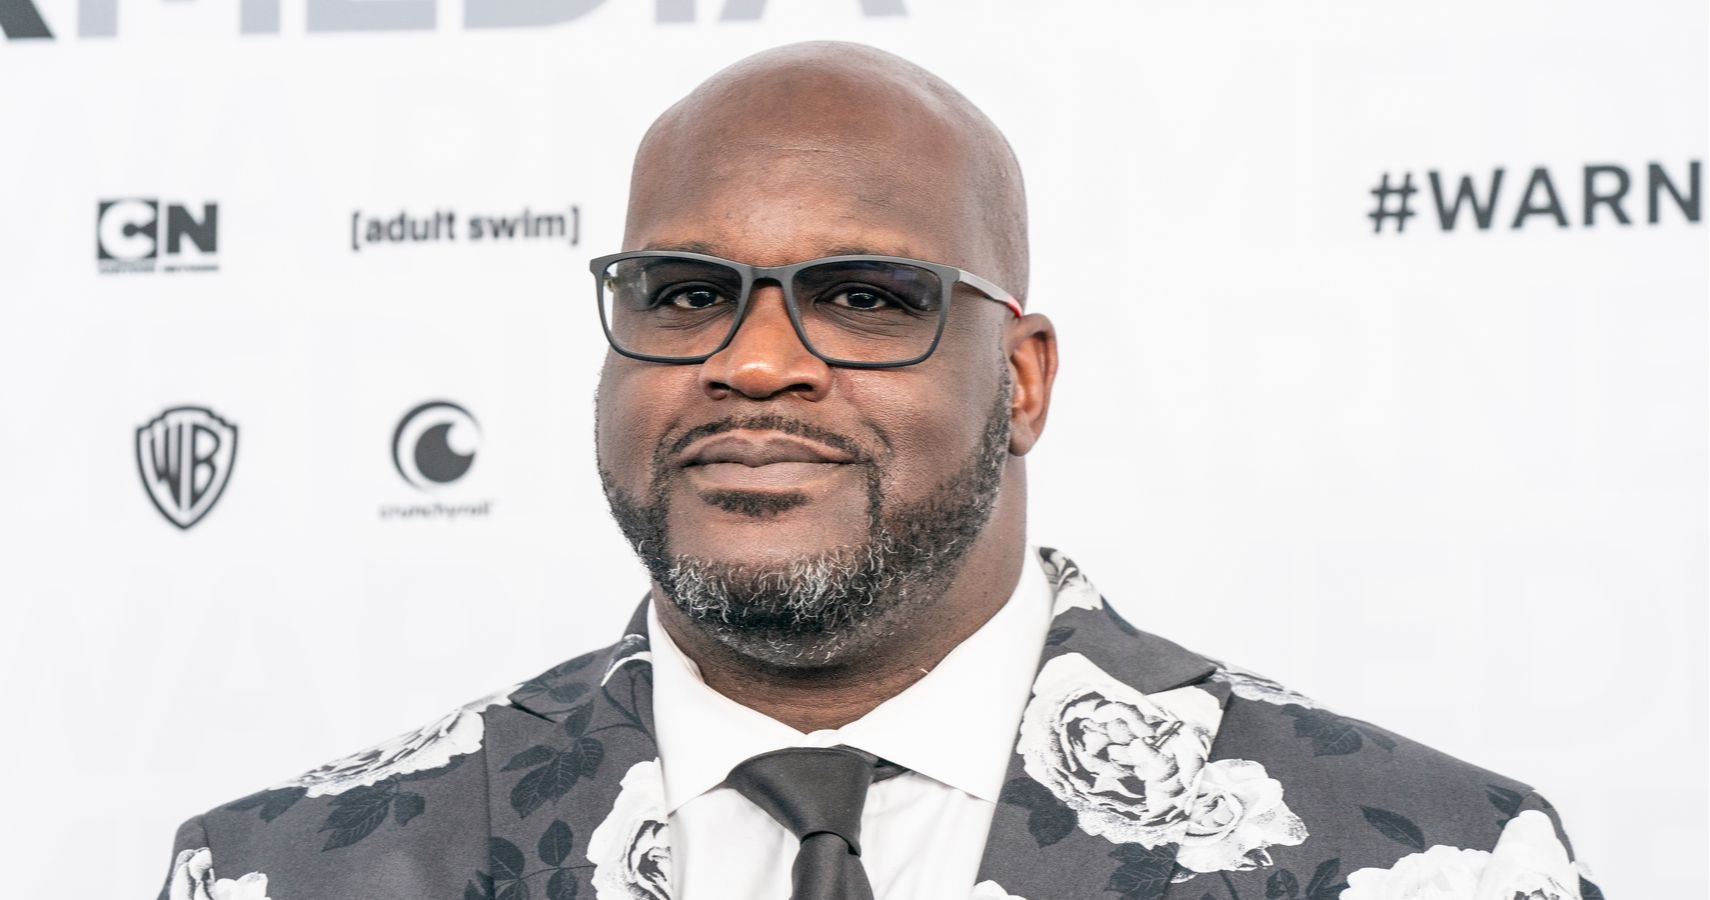 Shaq Industries: Inside The Brilliant Business Mind Of Shaquille O'Neal